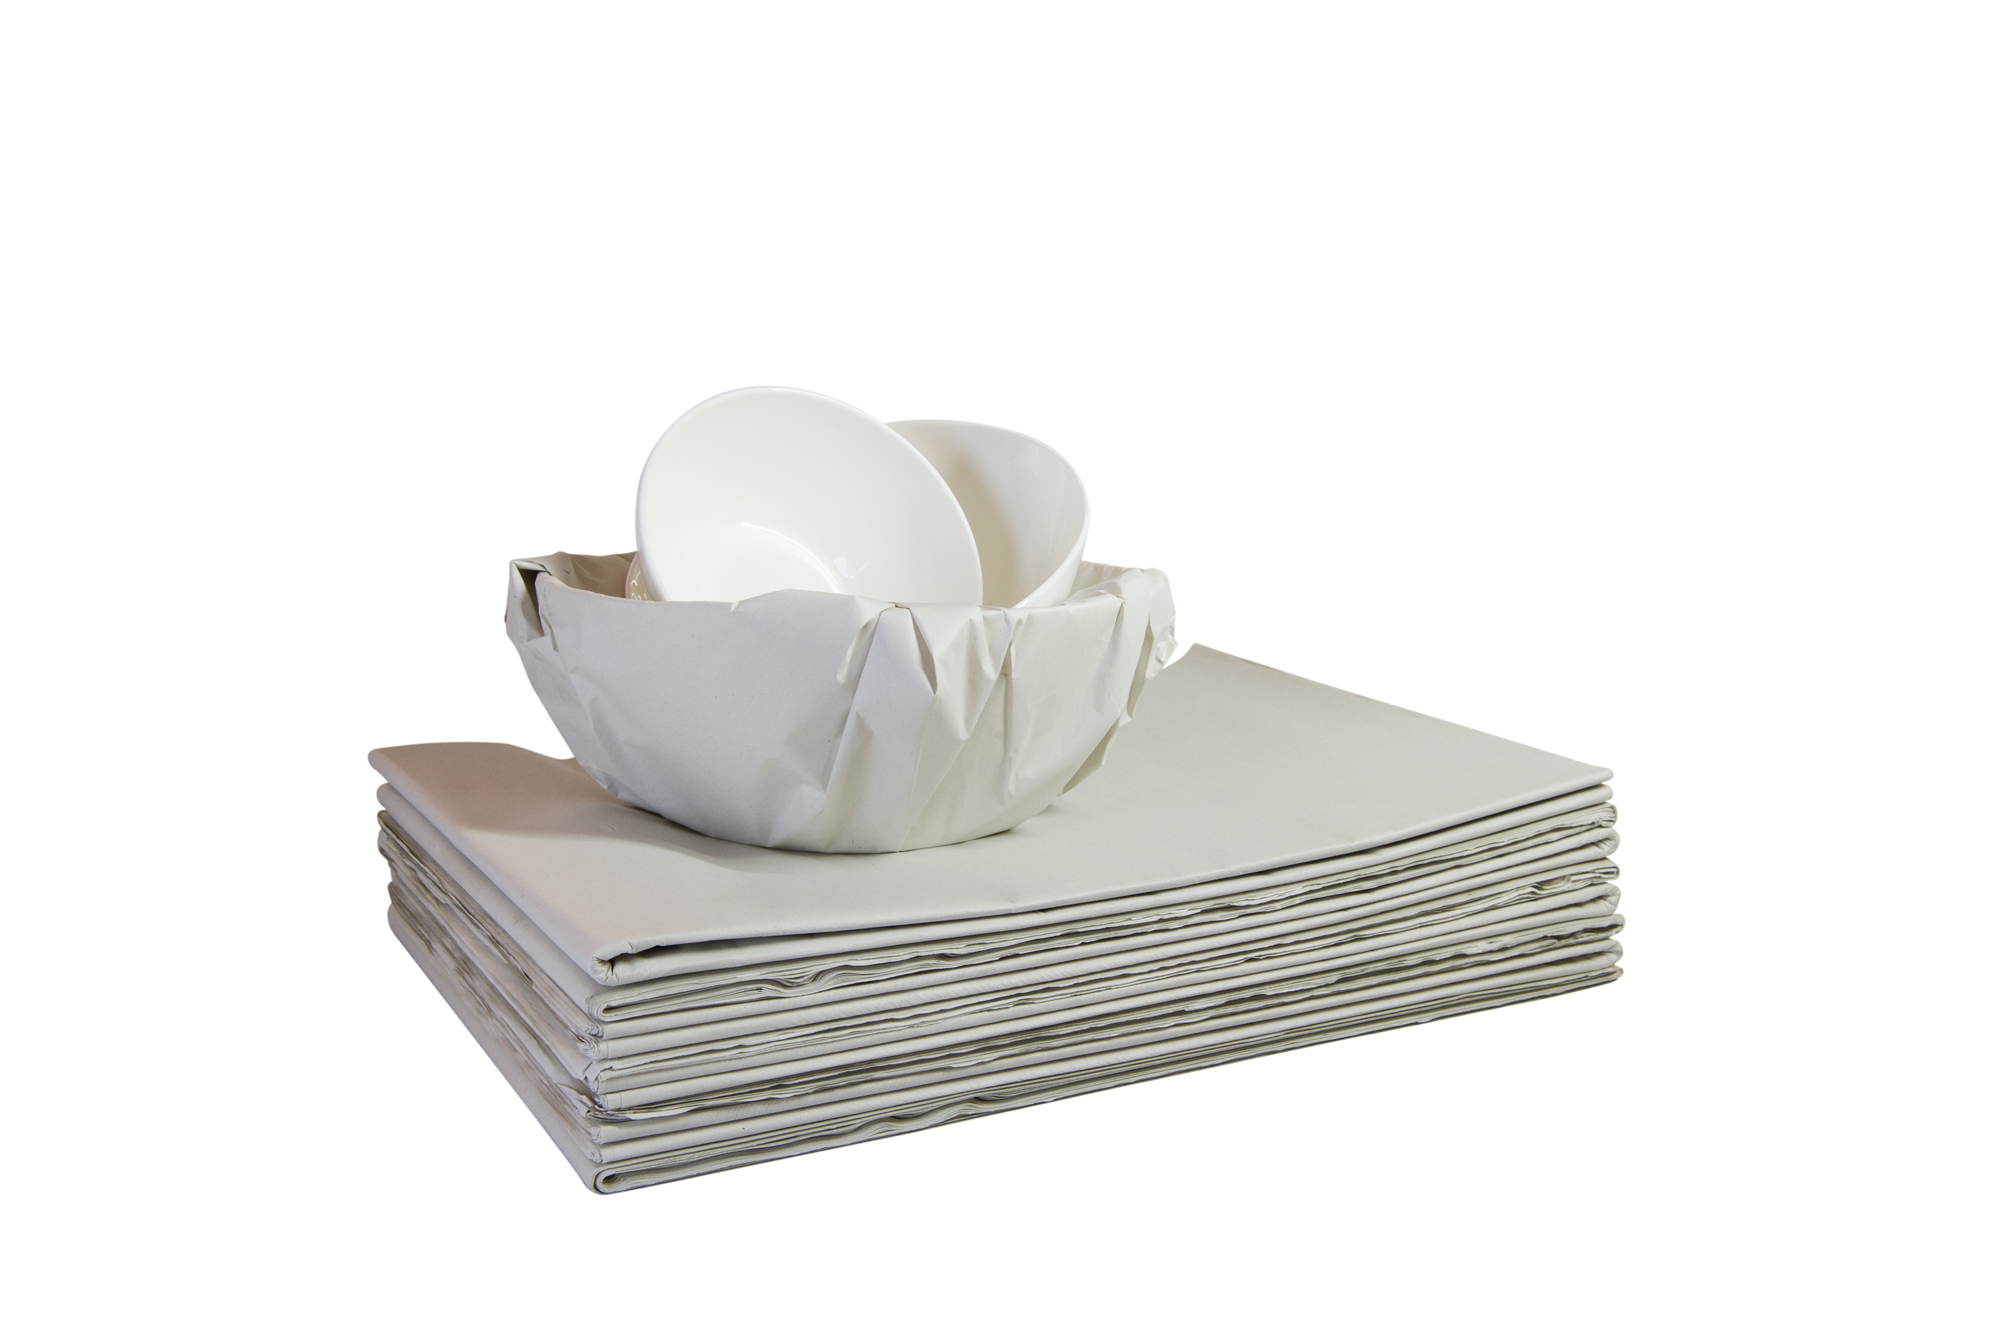 Looking Good Newsprint Packing Paper Initial Packaging Solutions 100 ...